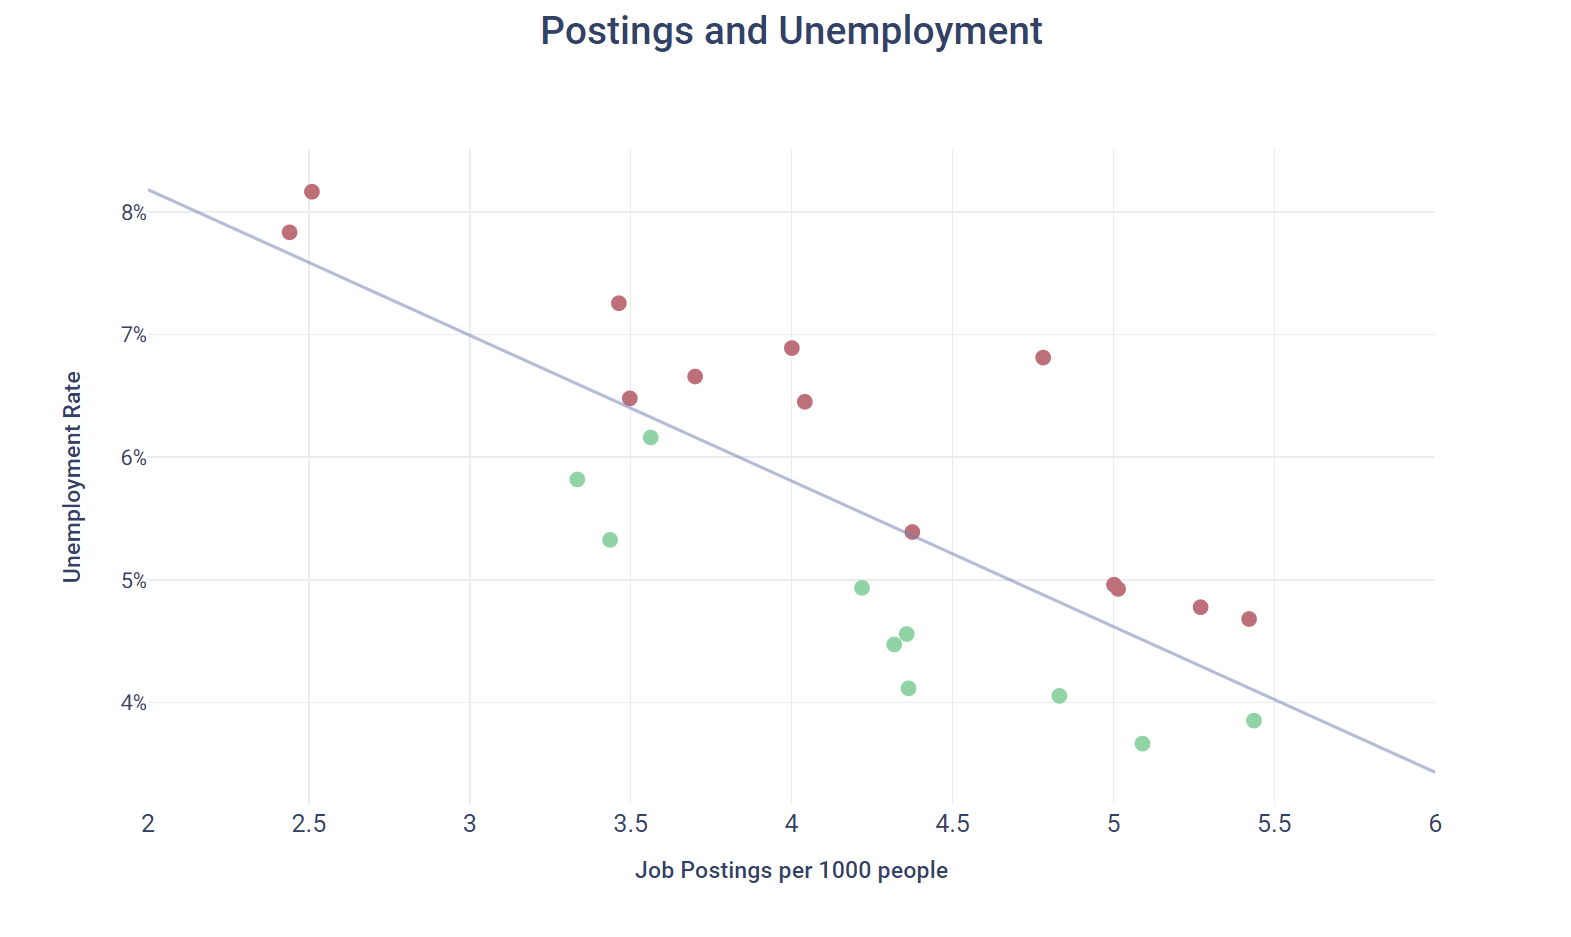 Postings and Unemployment